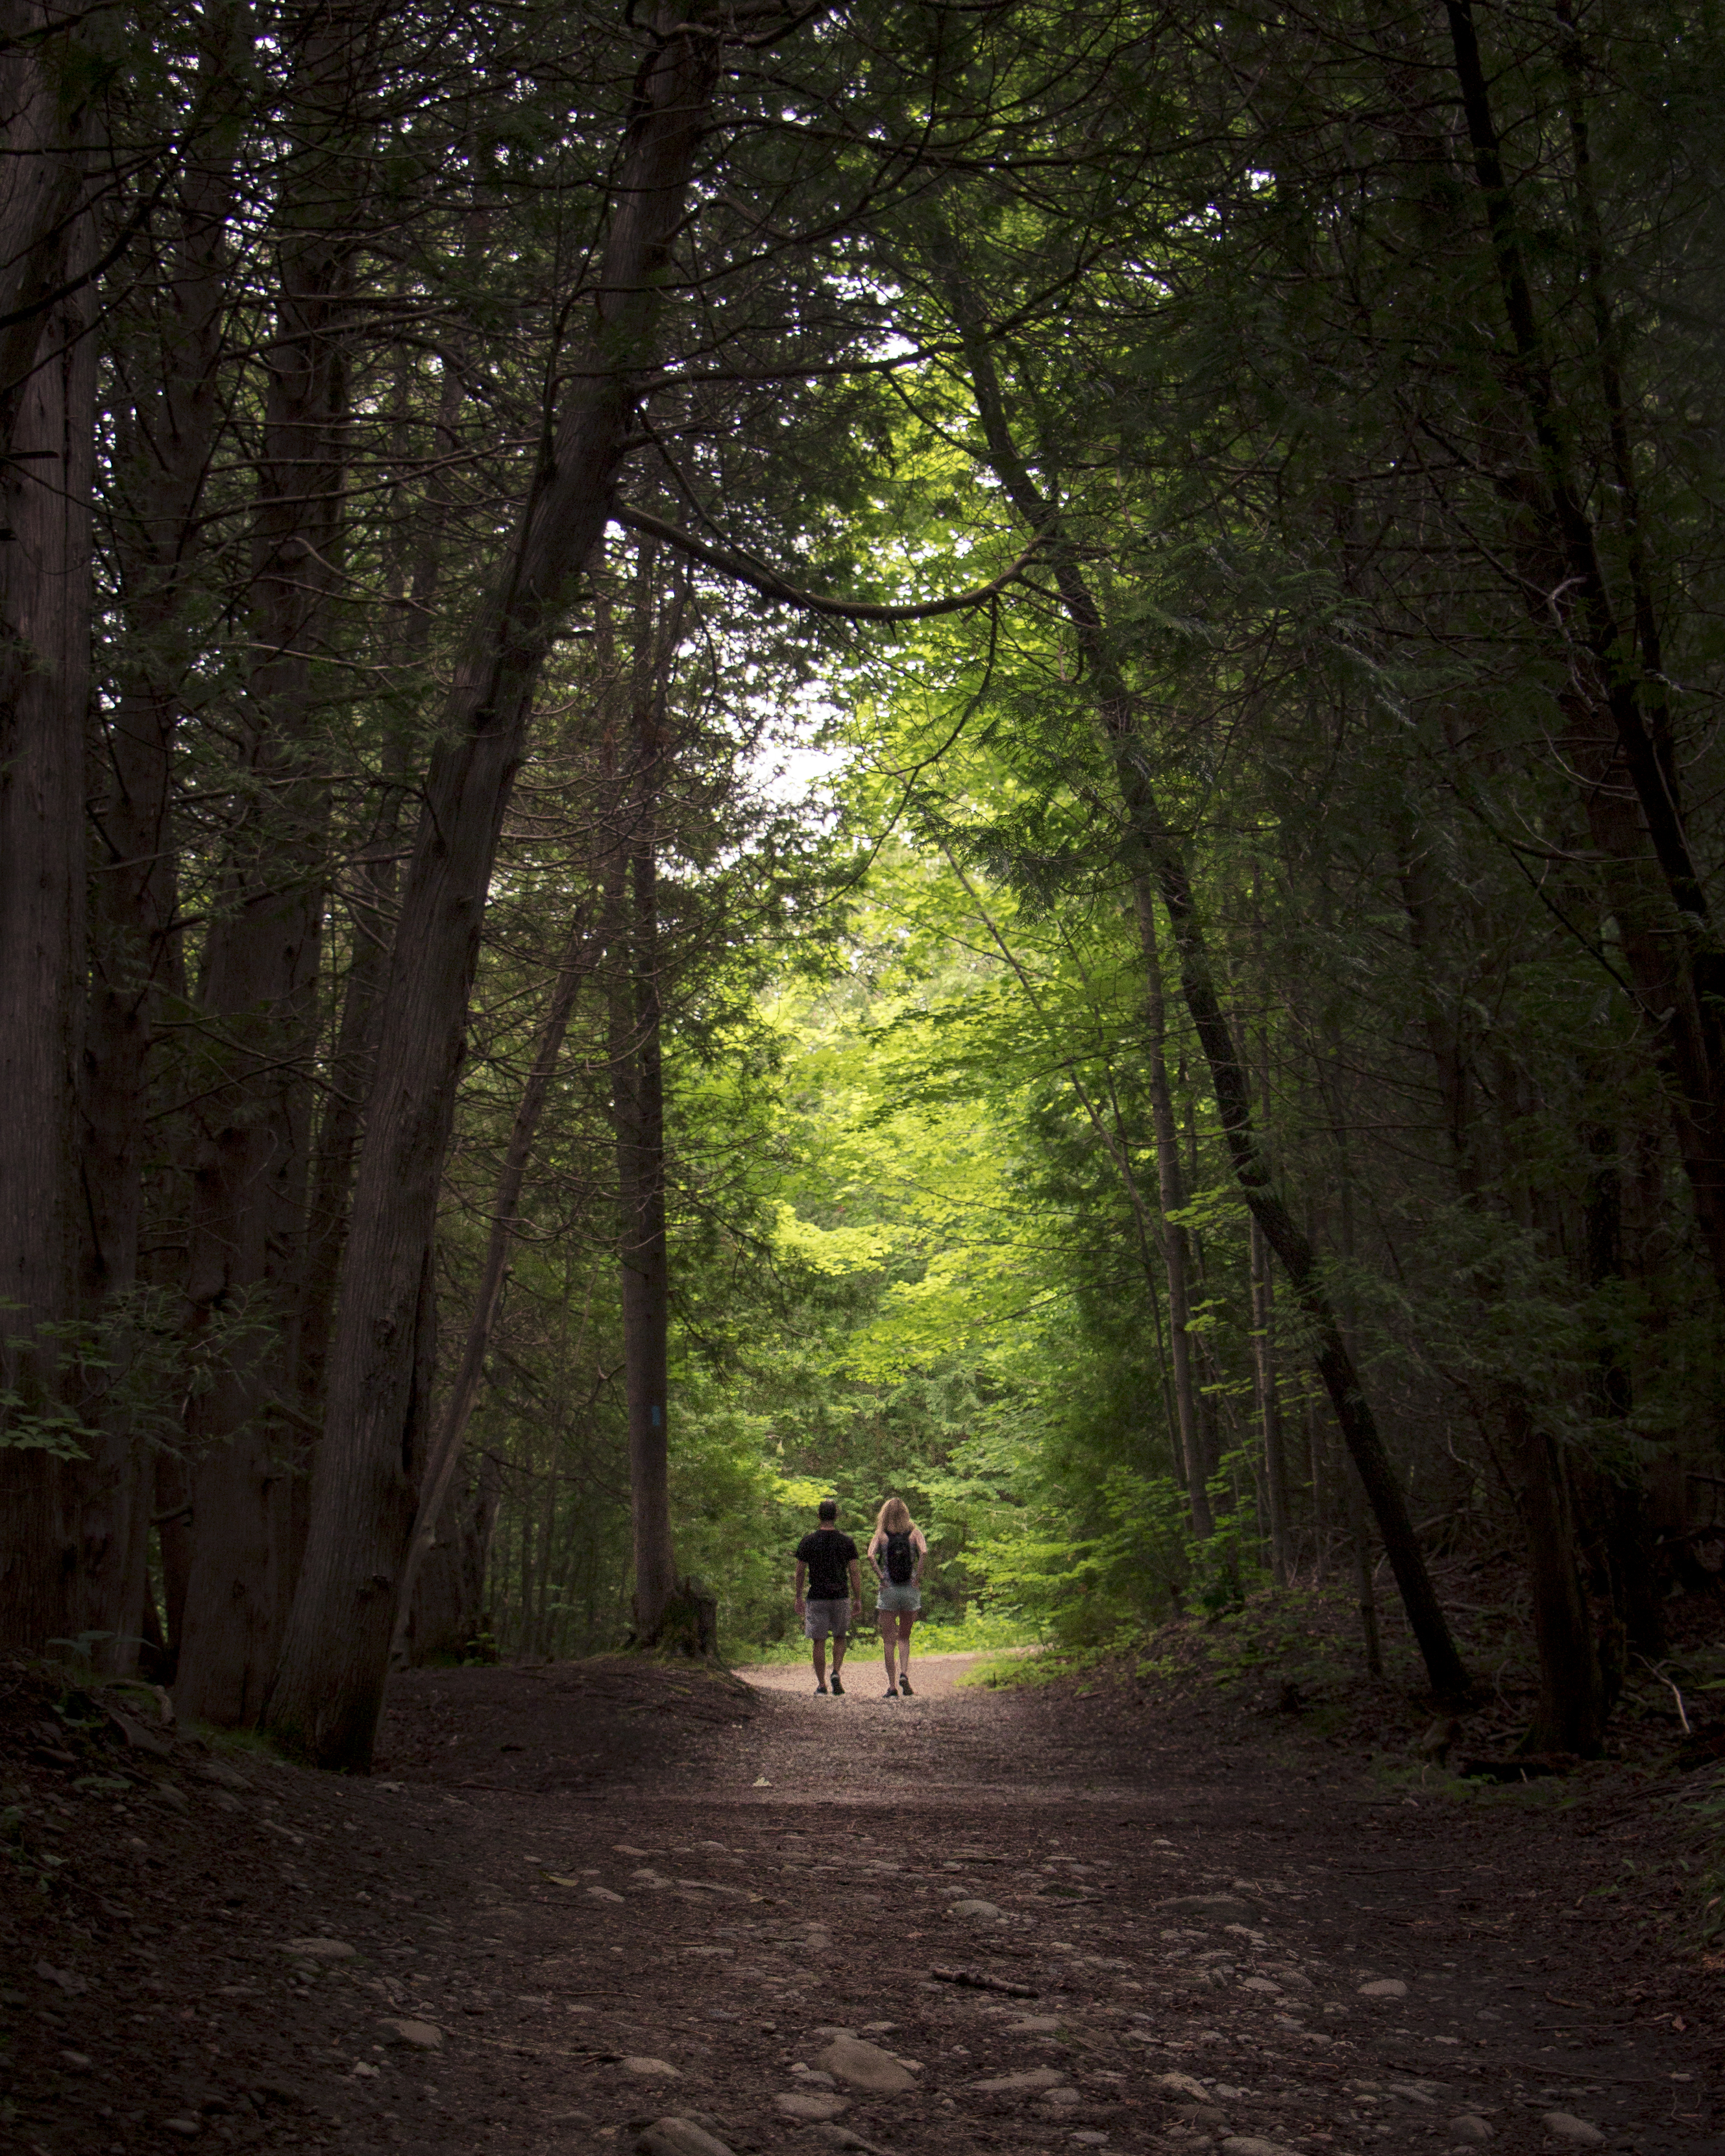 A couple walking in the distance in a forest